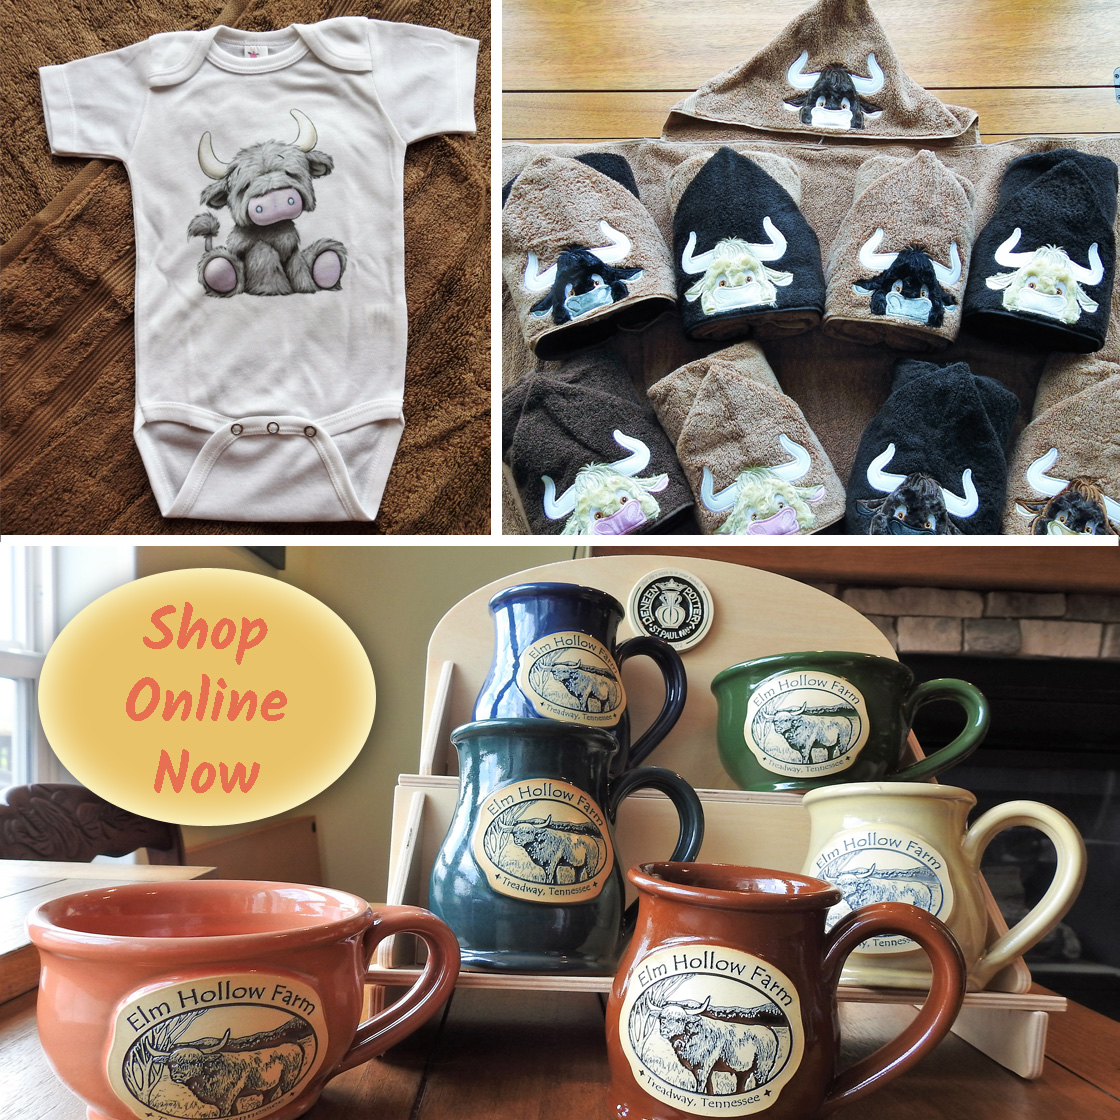 Merchandise photo collage showing items with Highland cows and Elm Hollow Farm logo